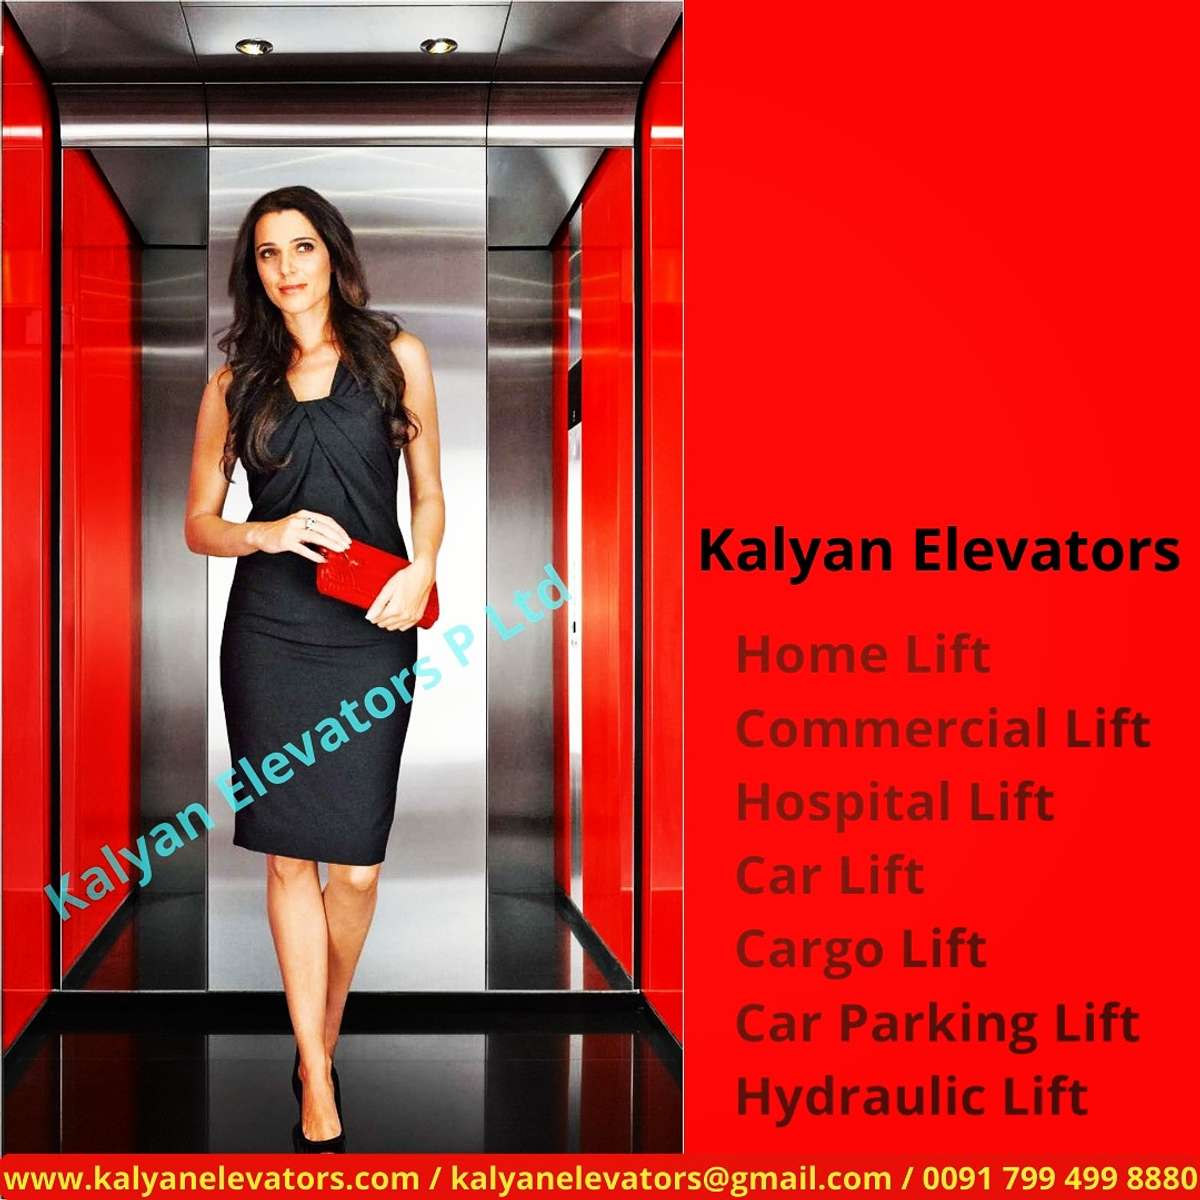 ❤❤❤❤Kalyan Home Elevators offers the long-awaited solution to vertical mobility within homes at affordable prices and easy-to-use features. Our customized and aesthetically designed home lifts are easily installable in preexisting homes as well as houses under construction, and help you relieve the headache of climbing. More details:- 